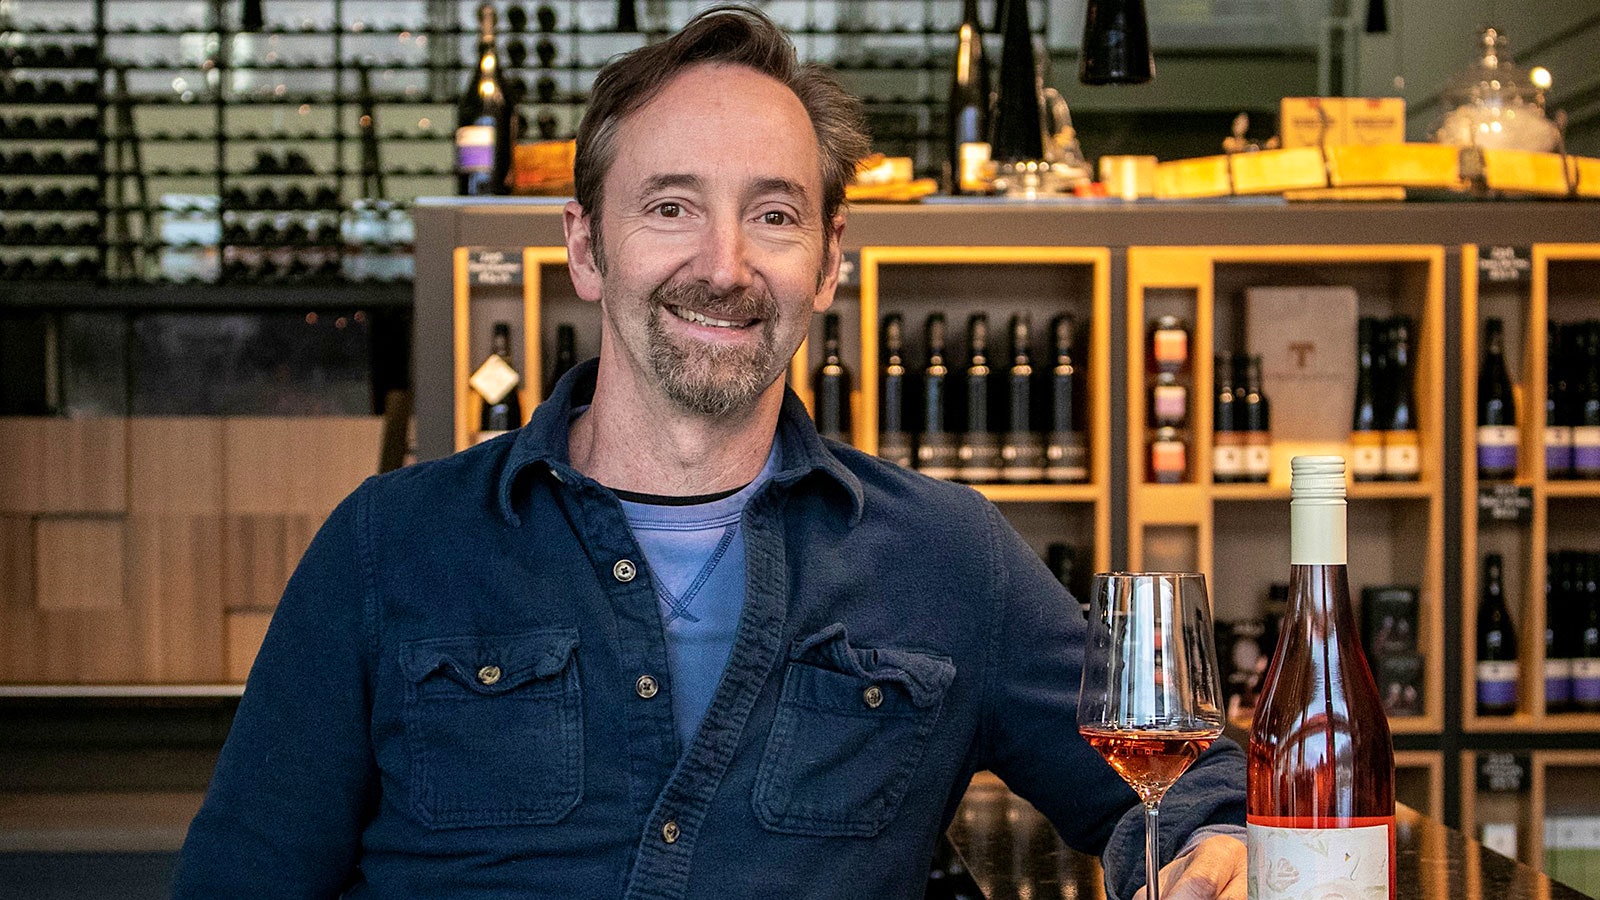  Paul Pender was winemaker at one of Niagara's top wineries for more than 15 years.